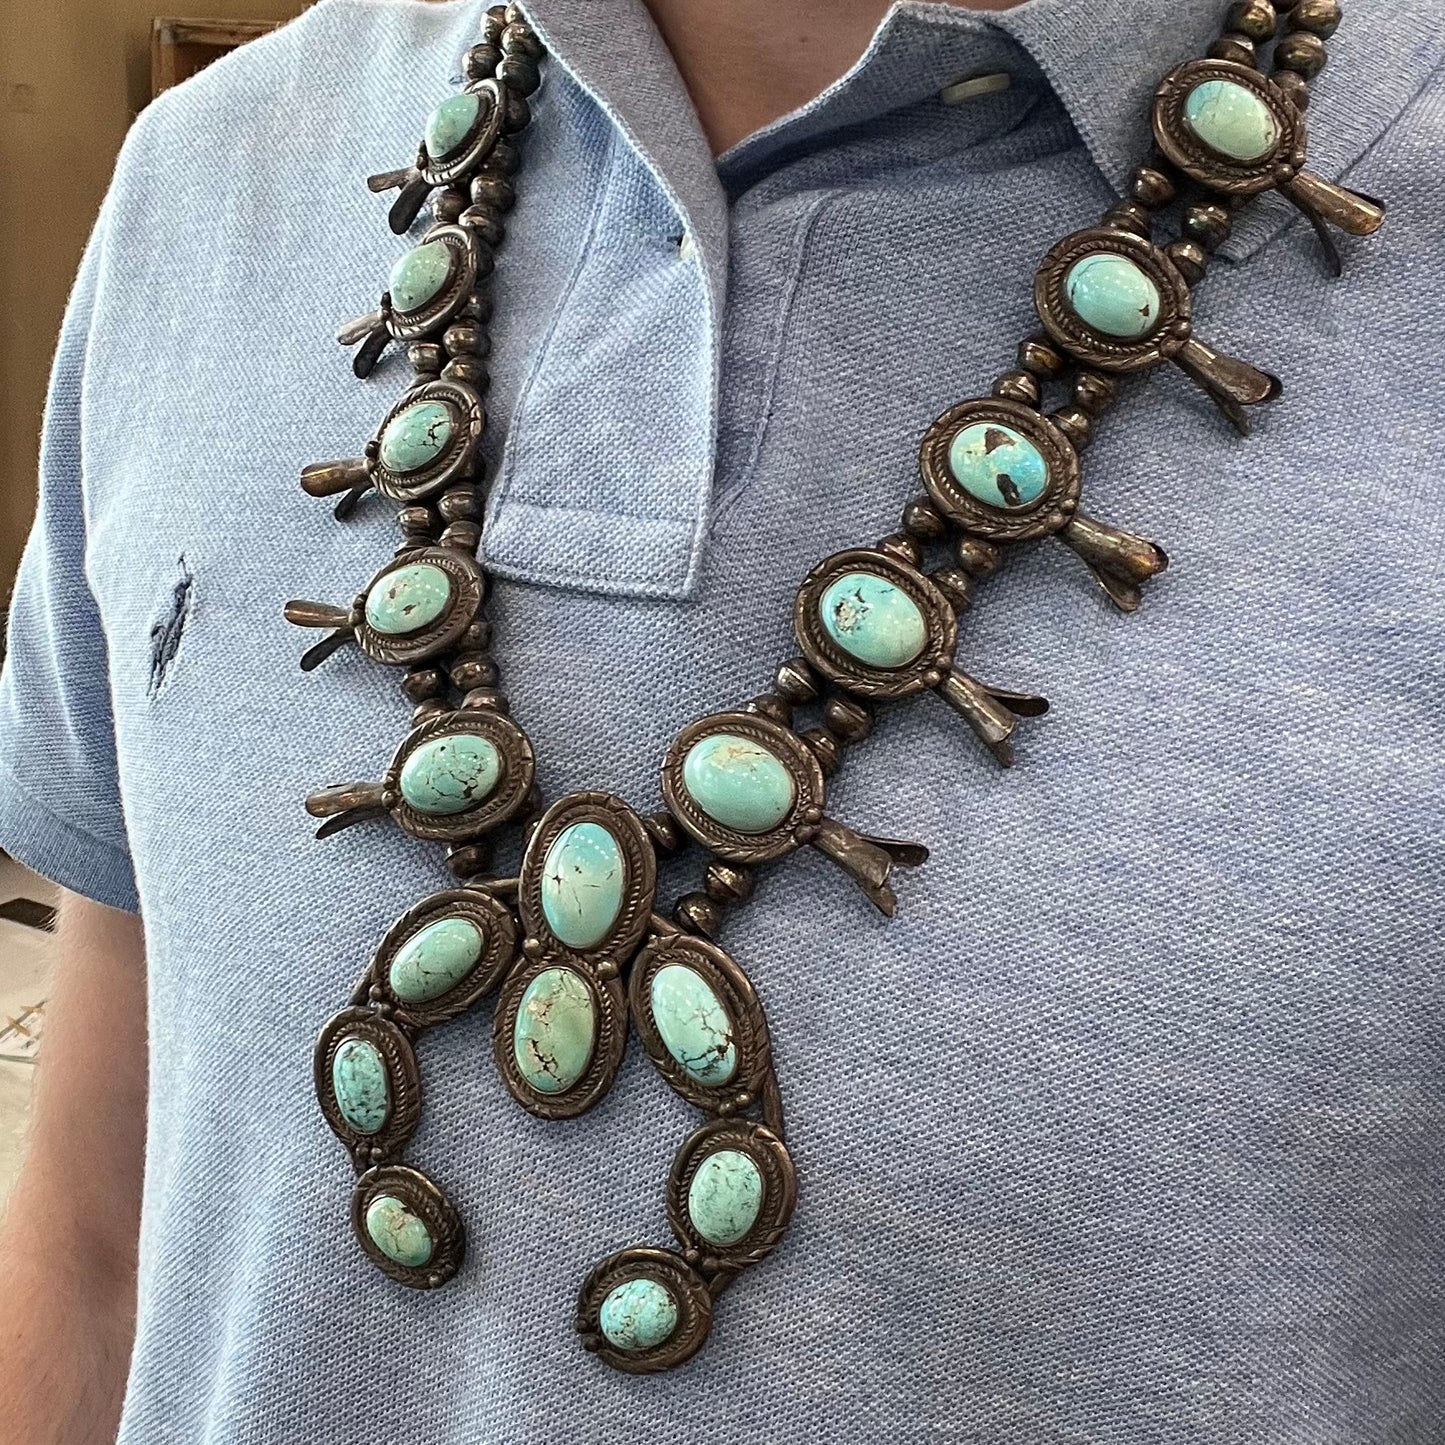 A silver Navajo style unisex squash blossom necklace set with oval cut Sleeping Beauty turquoise stones.